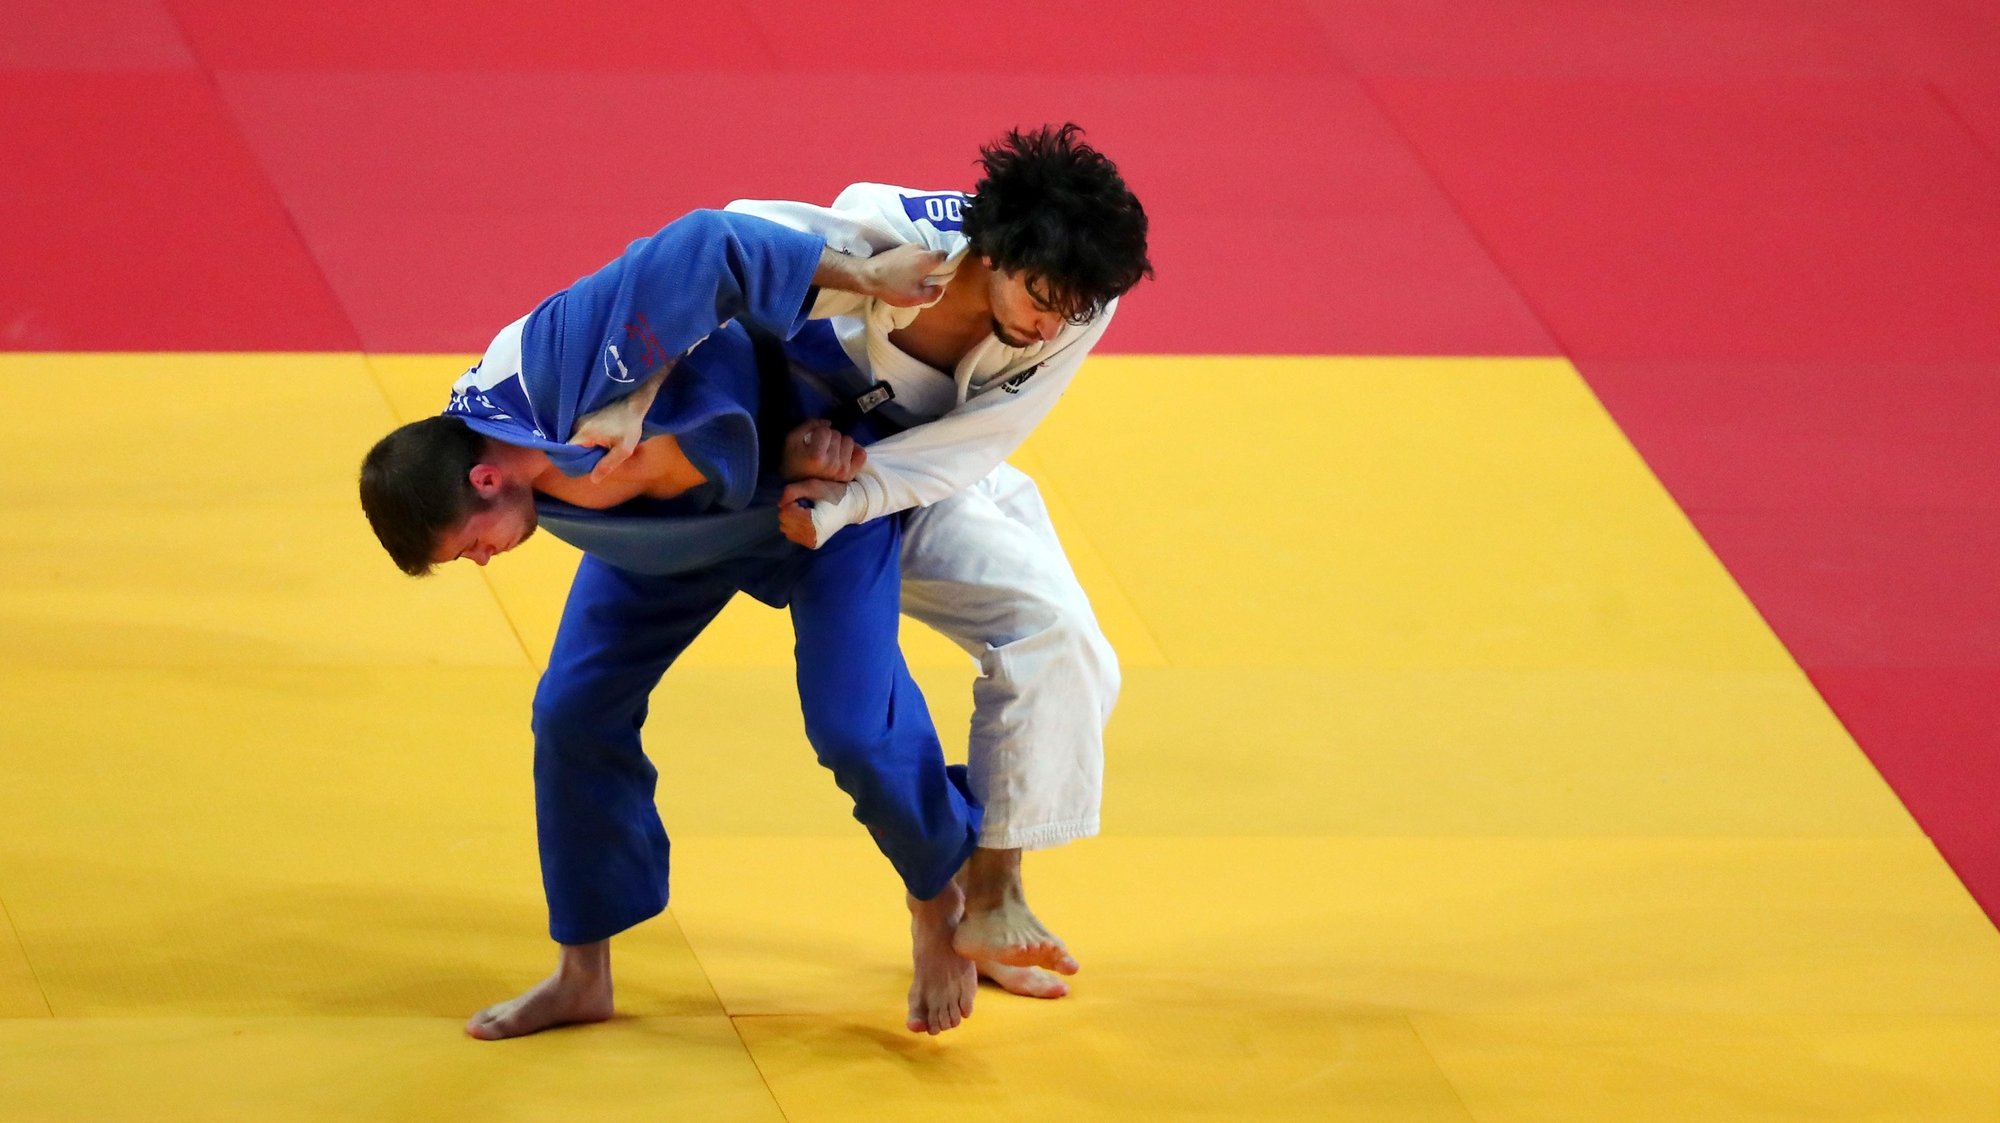 João Fernando of Portugal (white) and Martin Hojak of Slovenia (blue), in action during second round match in the men&#039;s -73kg category at the European Judo Championships in Lisbon, Portugal, 17 April 2021. NUNO VEIGA/LUSA